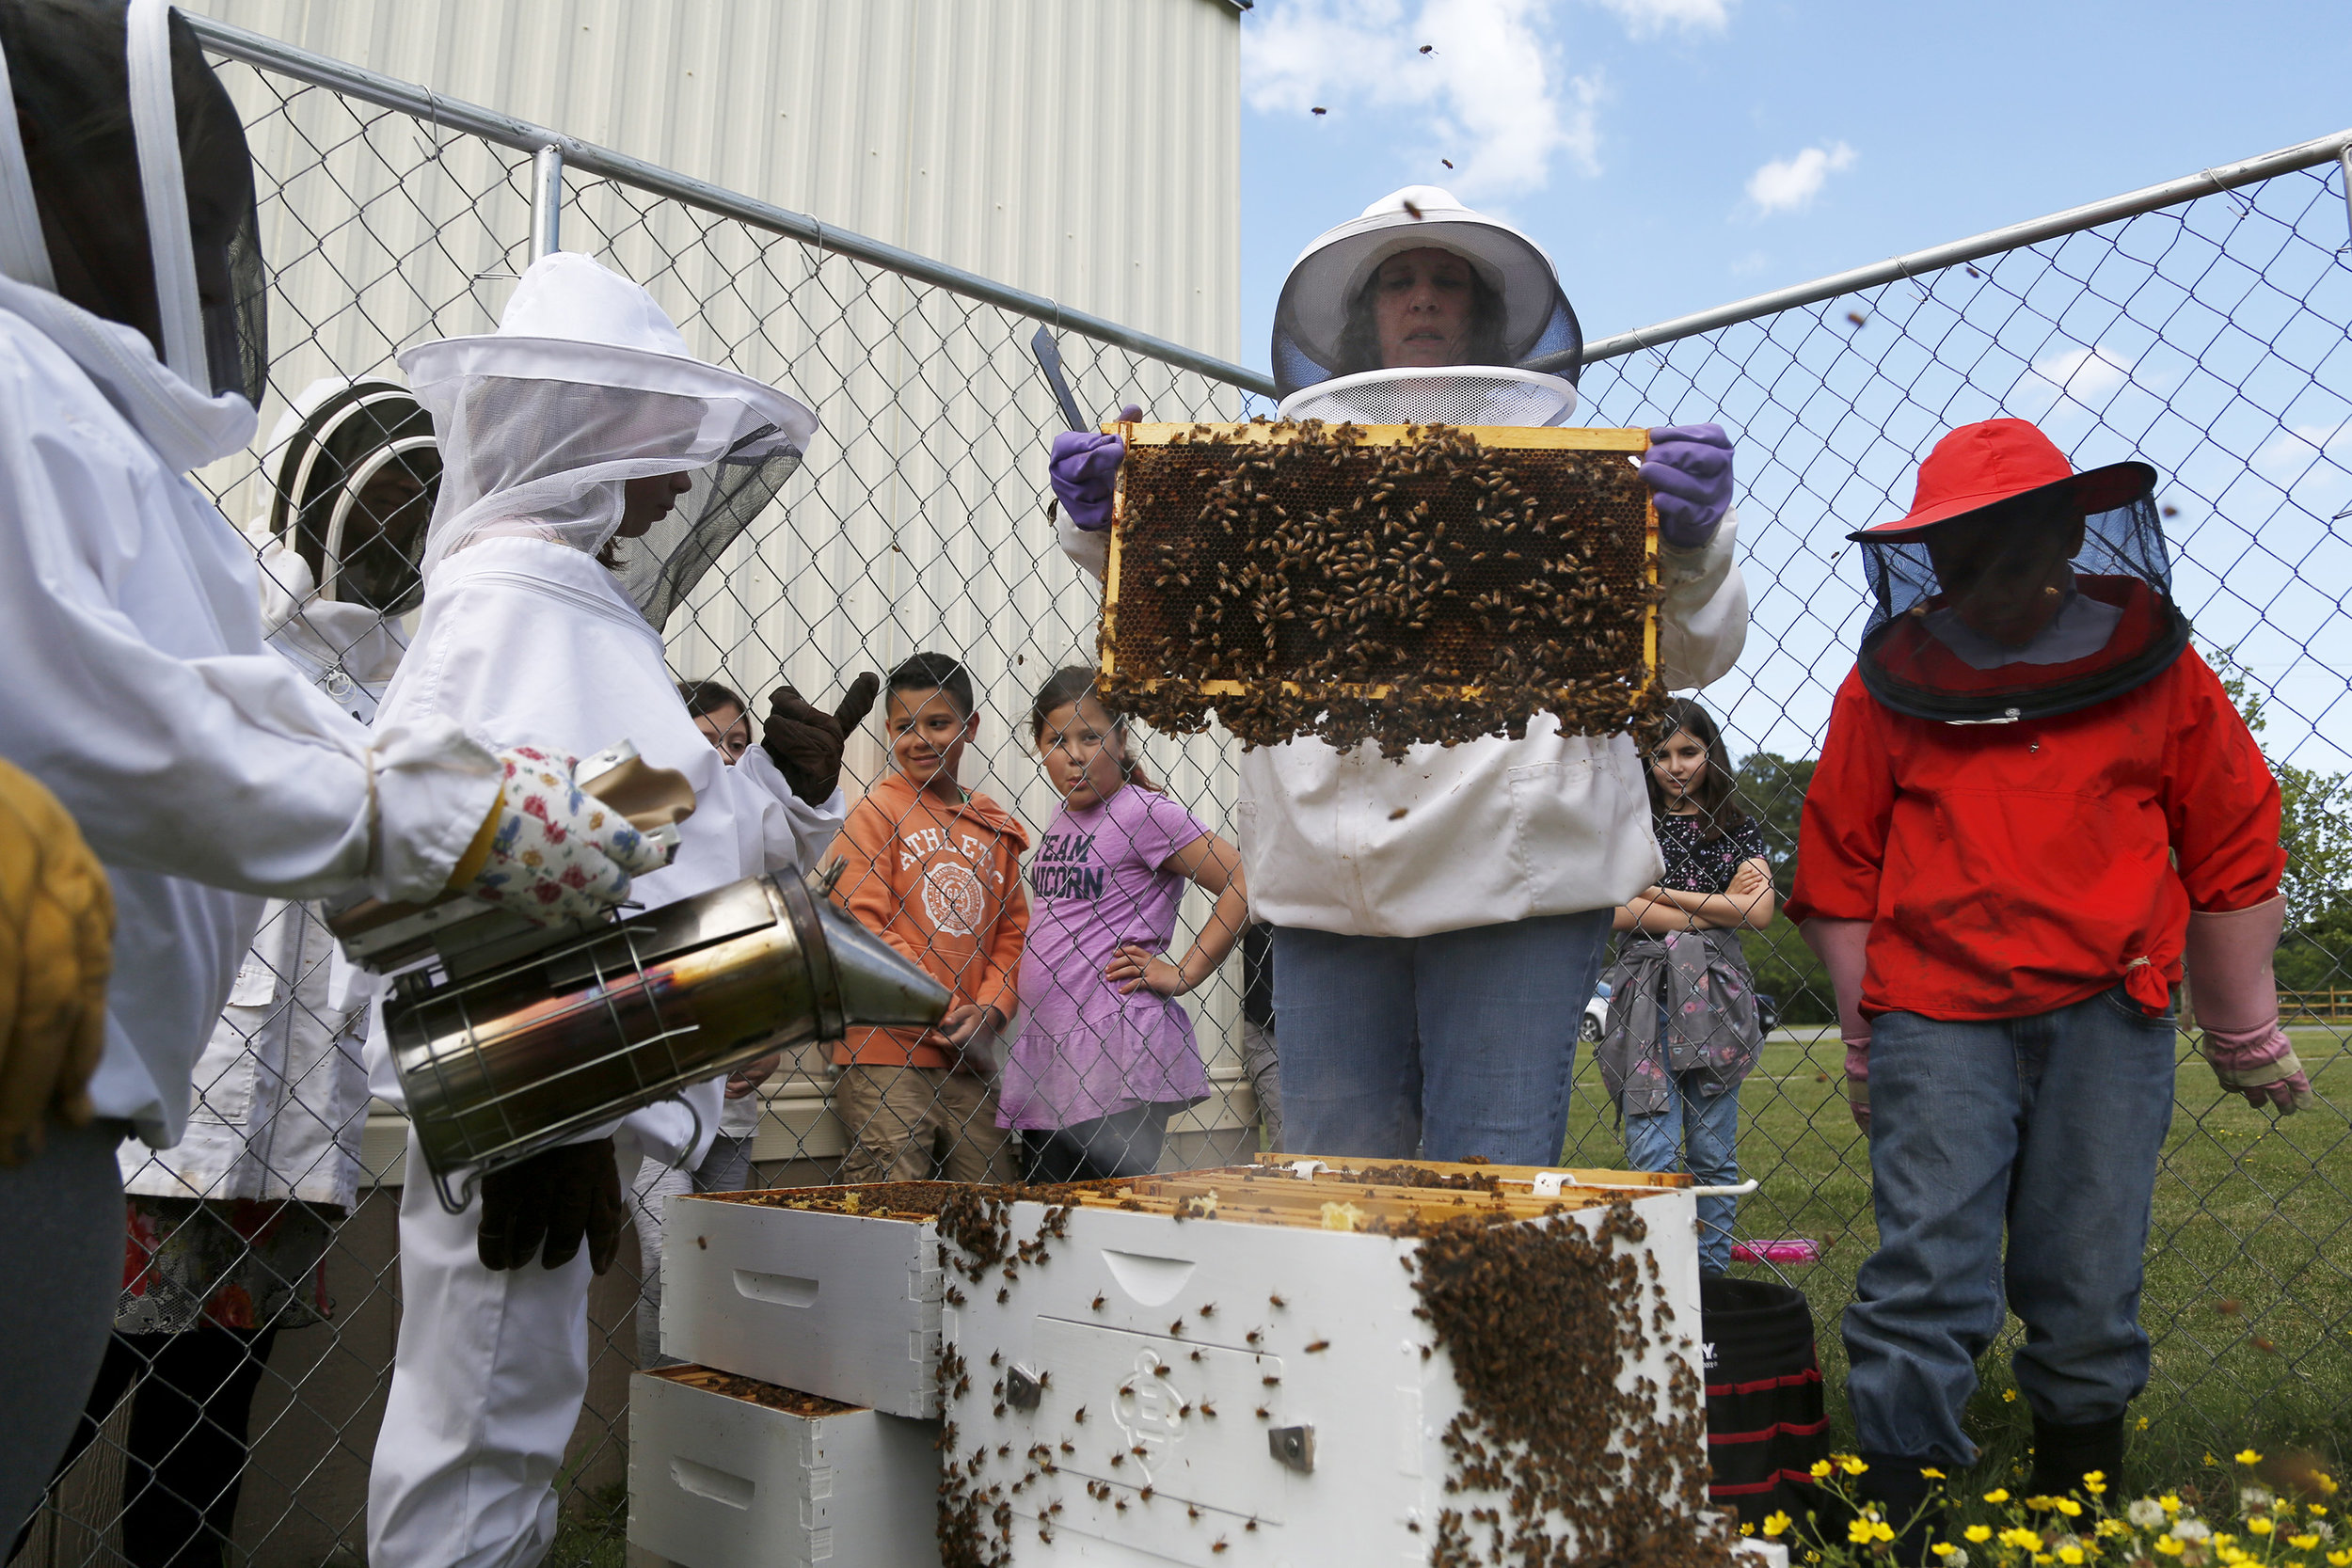  Teacher Kathy Kilgore, center, holds up a frame covered in bees from the beehive to be inspected by the Langley Bee Club at Samuel P. Langley Elementary School in Hampton, VA, on May 9, 2019. This after school program is made up of about 12 students